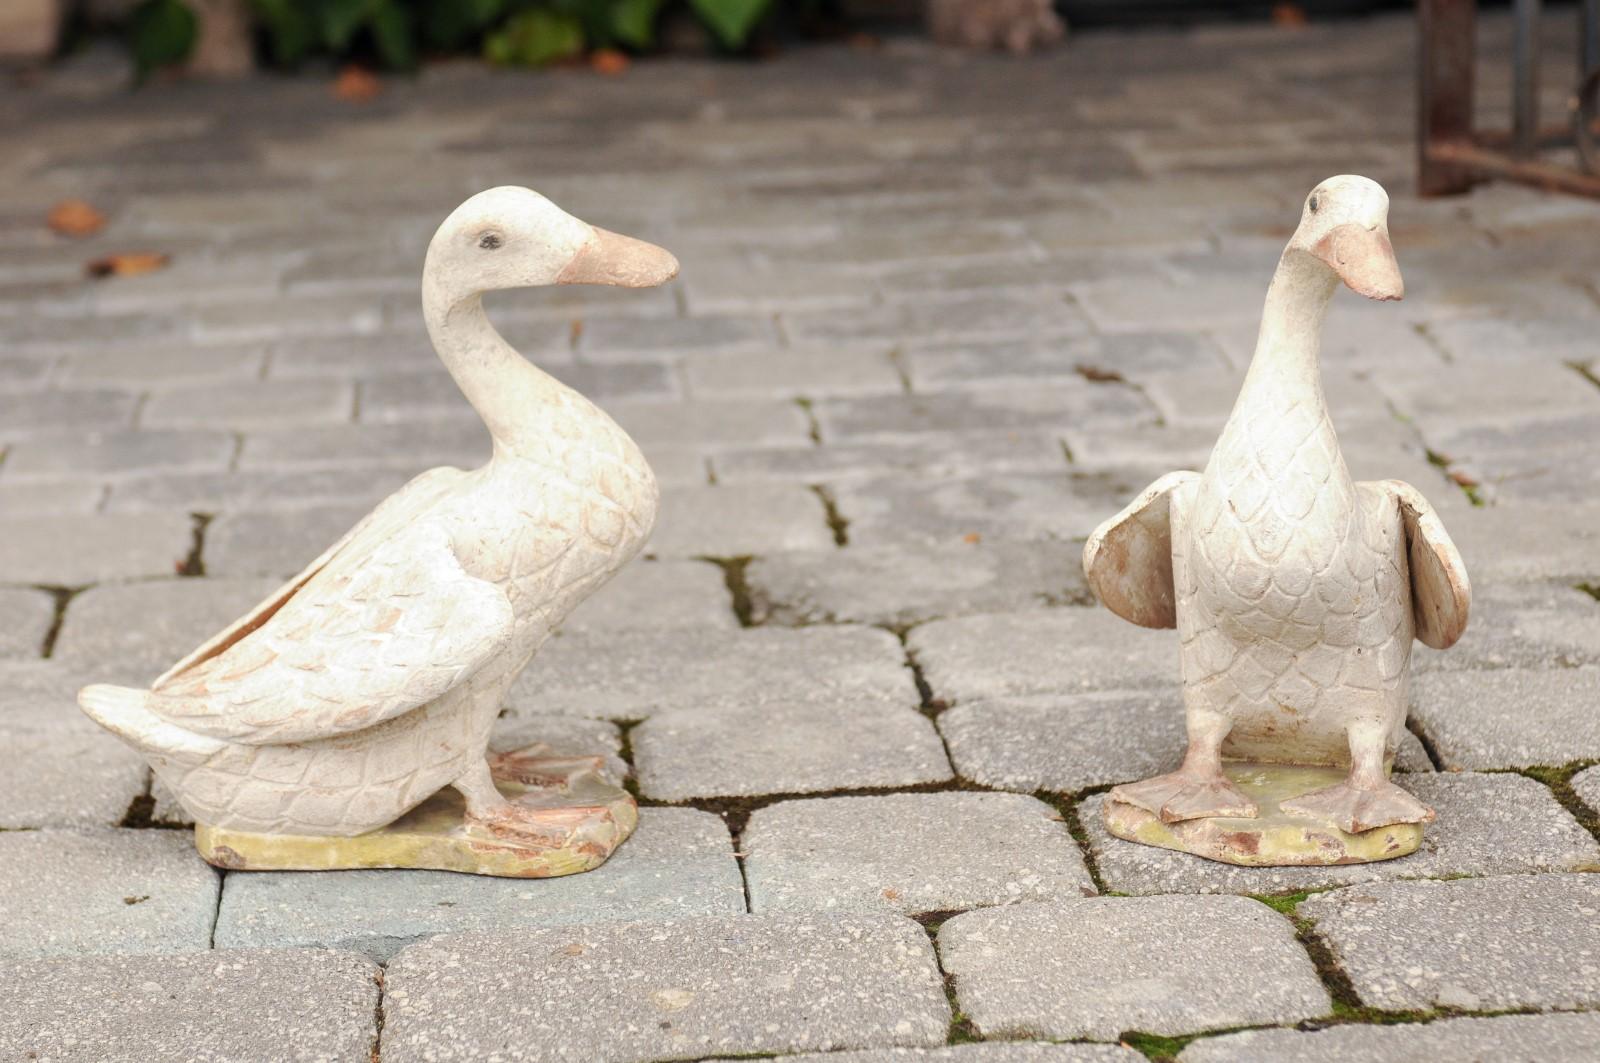 A pair of American carved and painted wood duck sculptures from the early 20th century. Made in the USA during the early years of the 20th century, this pair of sculptures is modeled on Chinese porcelain examples. They features two charming ducks